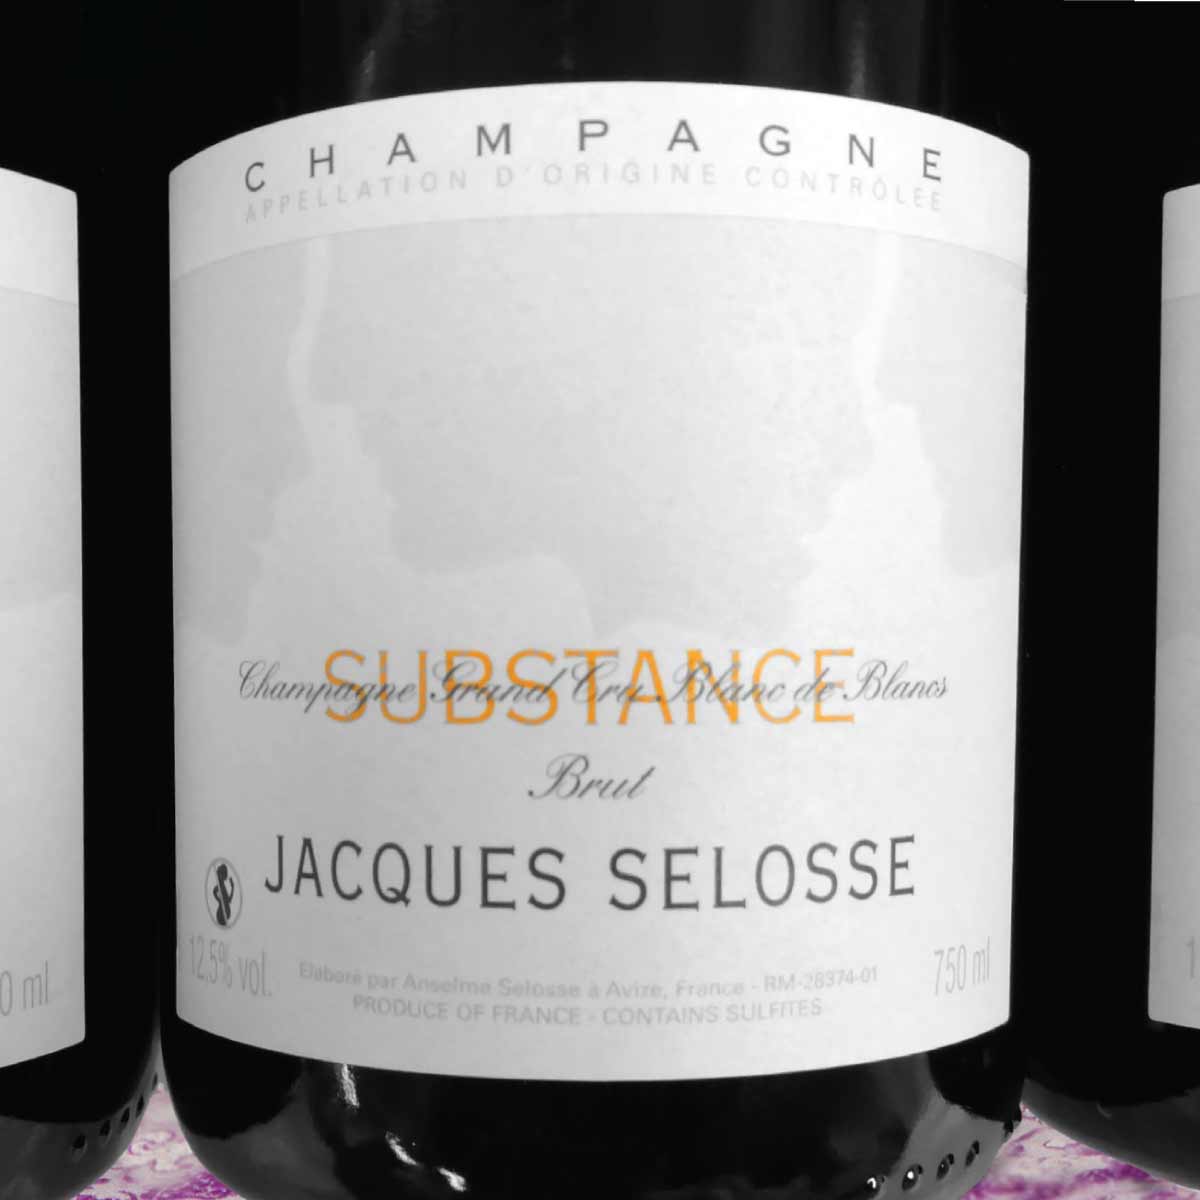 A Champagne Celebration Dinner with the Exquisite Wines of Jacques Selosse at Tocqueville